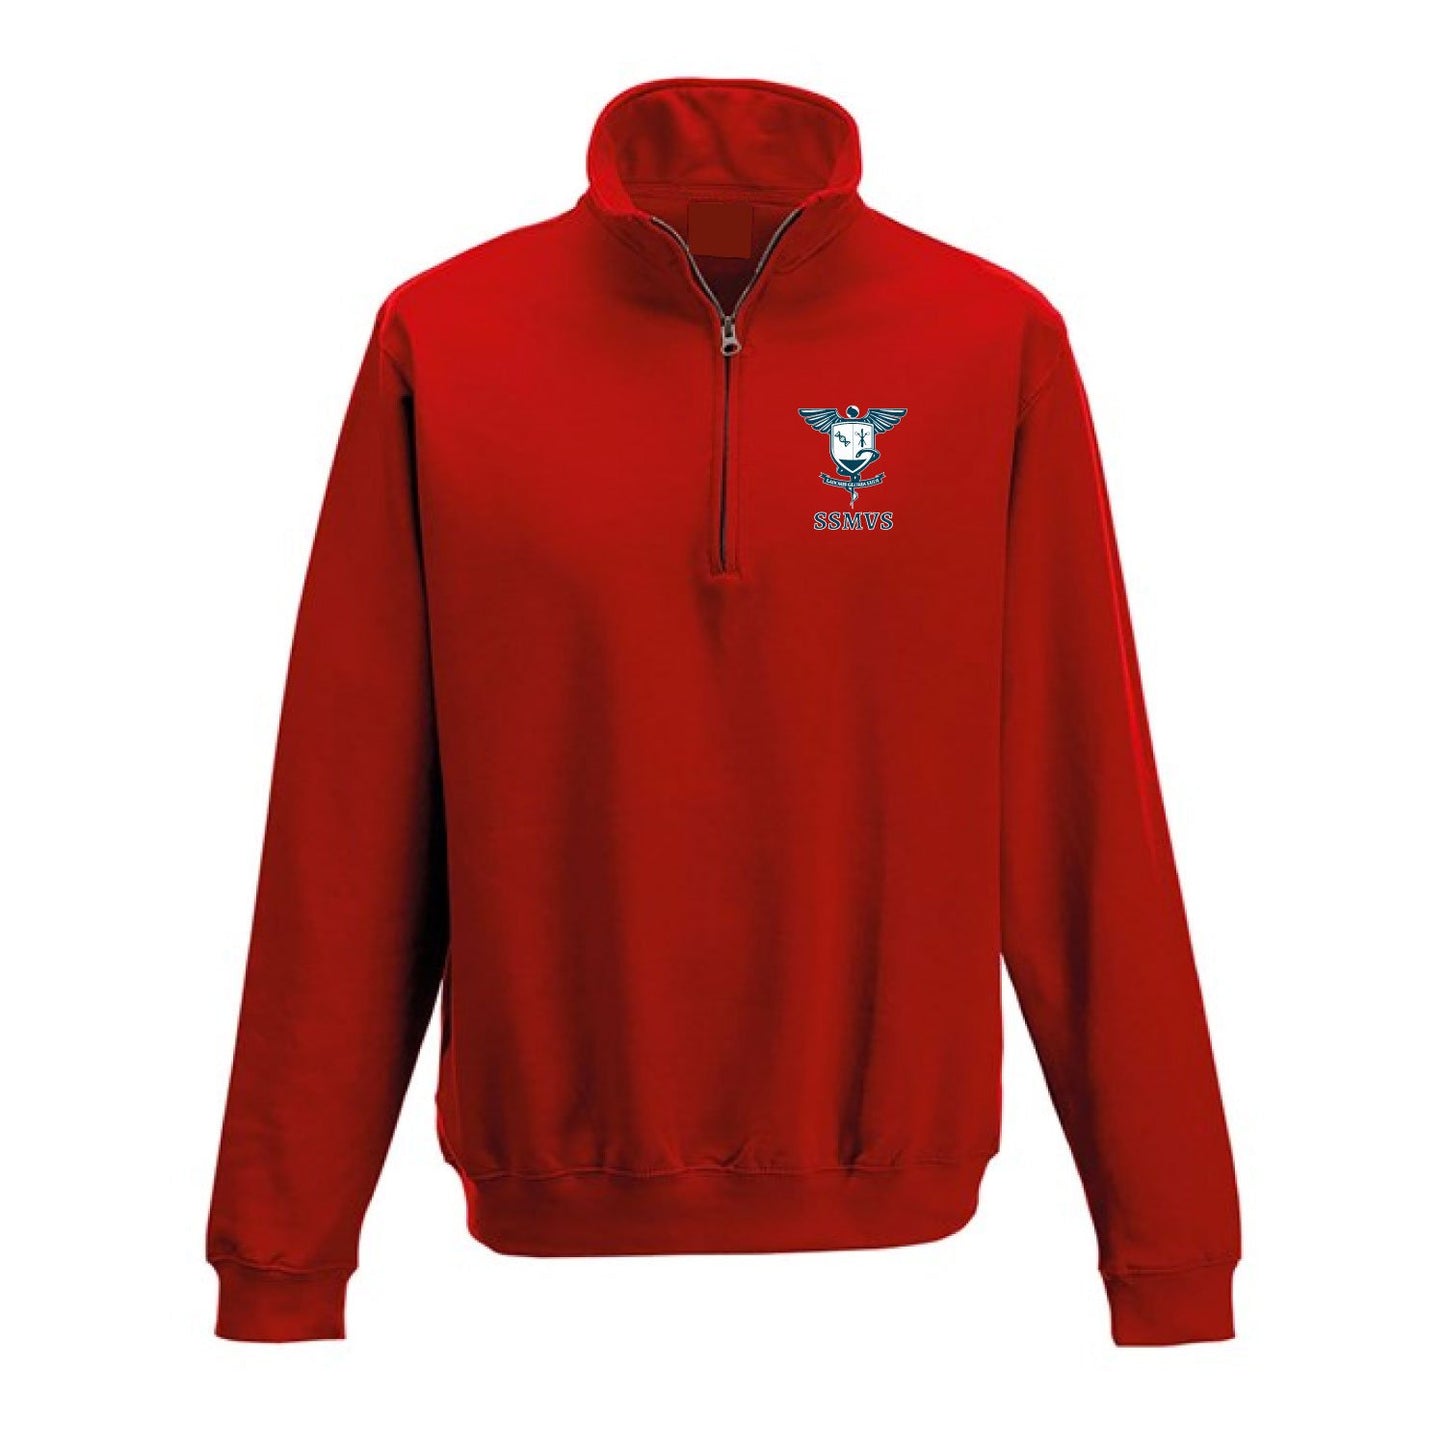 sidney sussex medical and veterinary society quater zip sweatshirt red